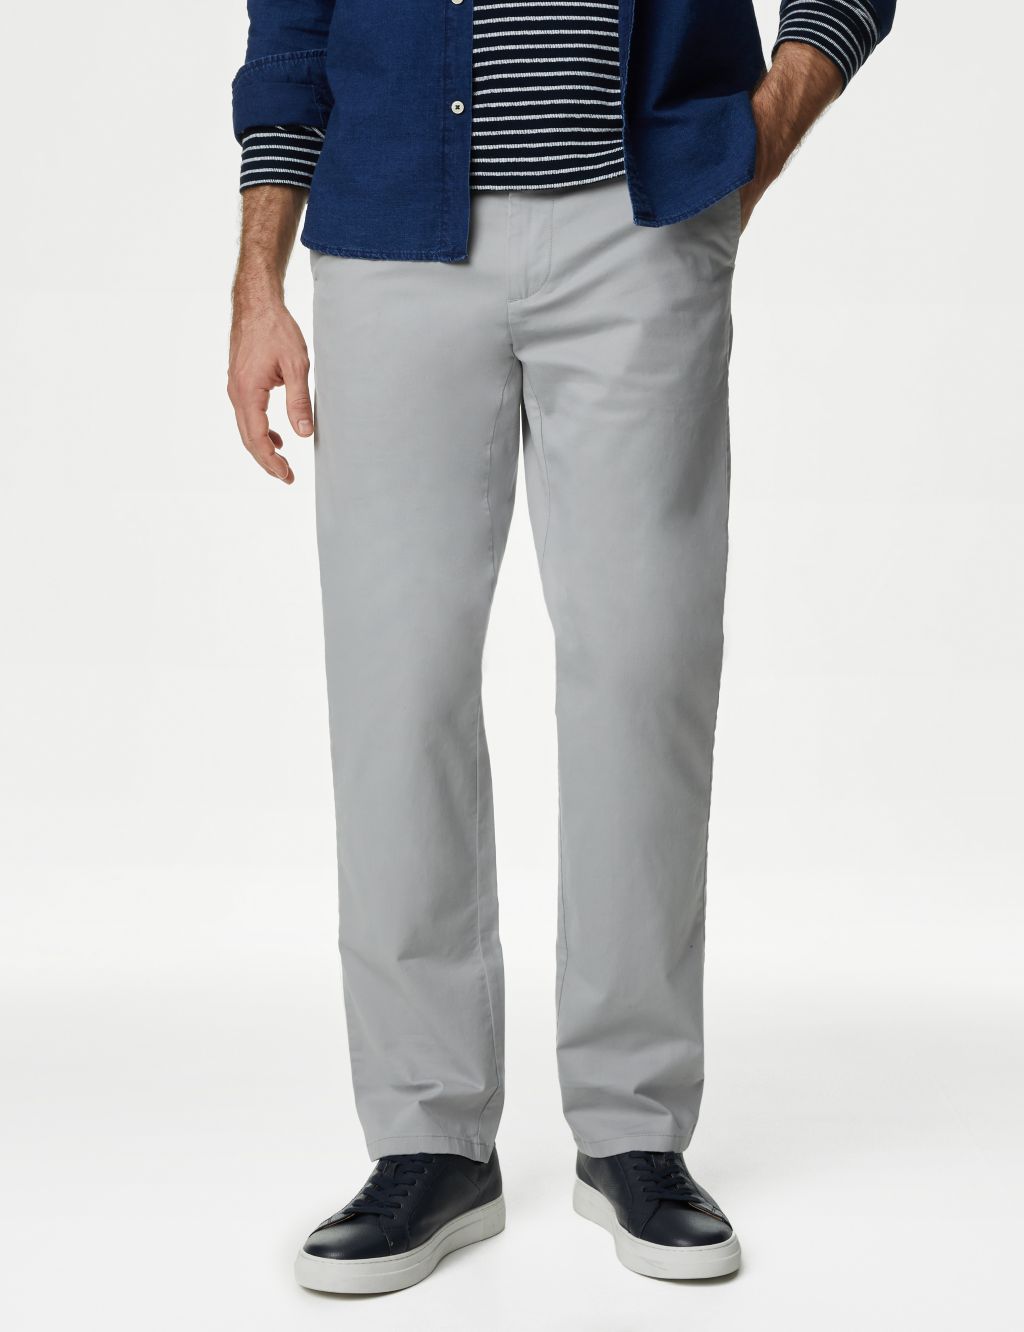 Grey Pants with Blue Shirt Casual Outfits For Men In Their 20s (44